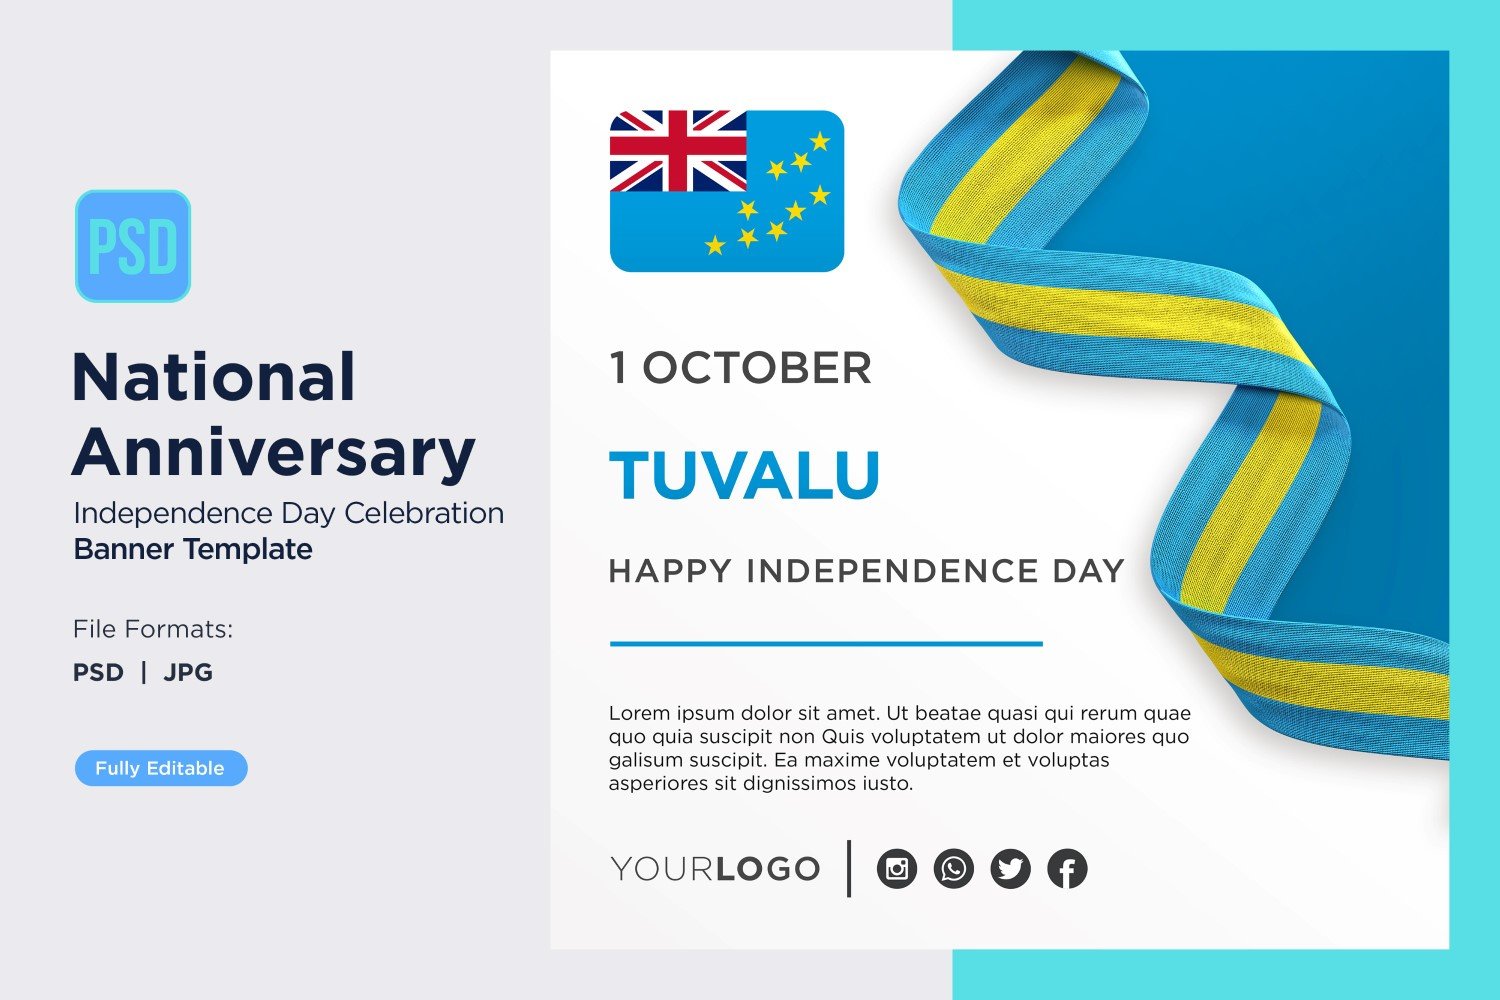 Template #402977 Day Celebration Webdesign Template - Logo template Preview